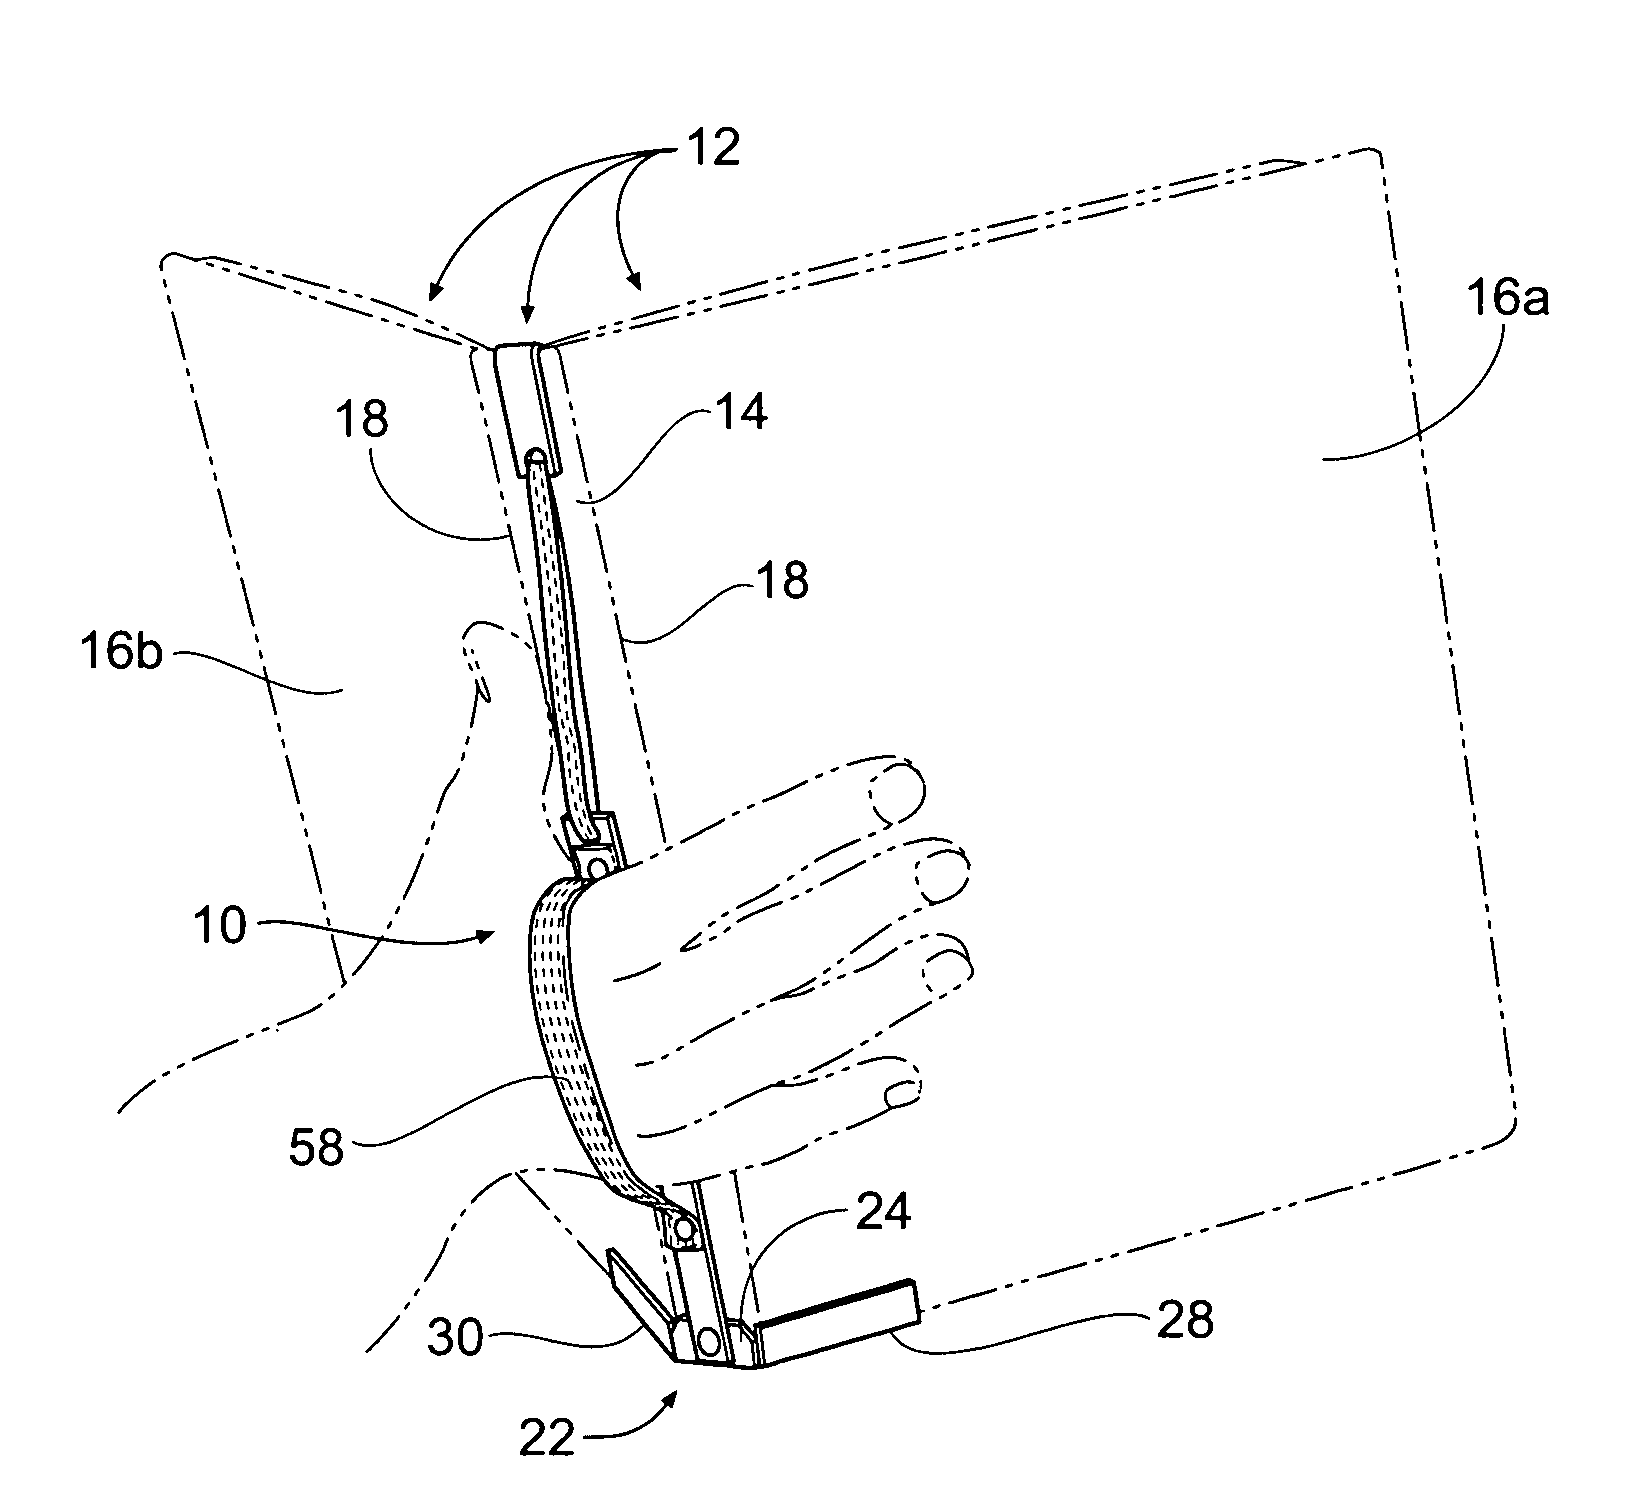 Manual support for folder or binder and contents thereof